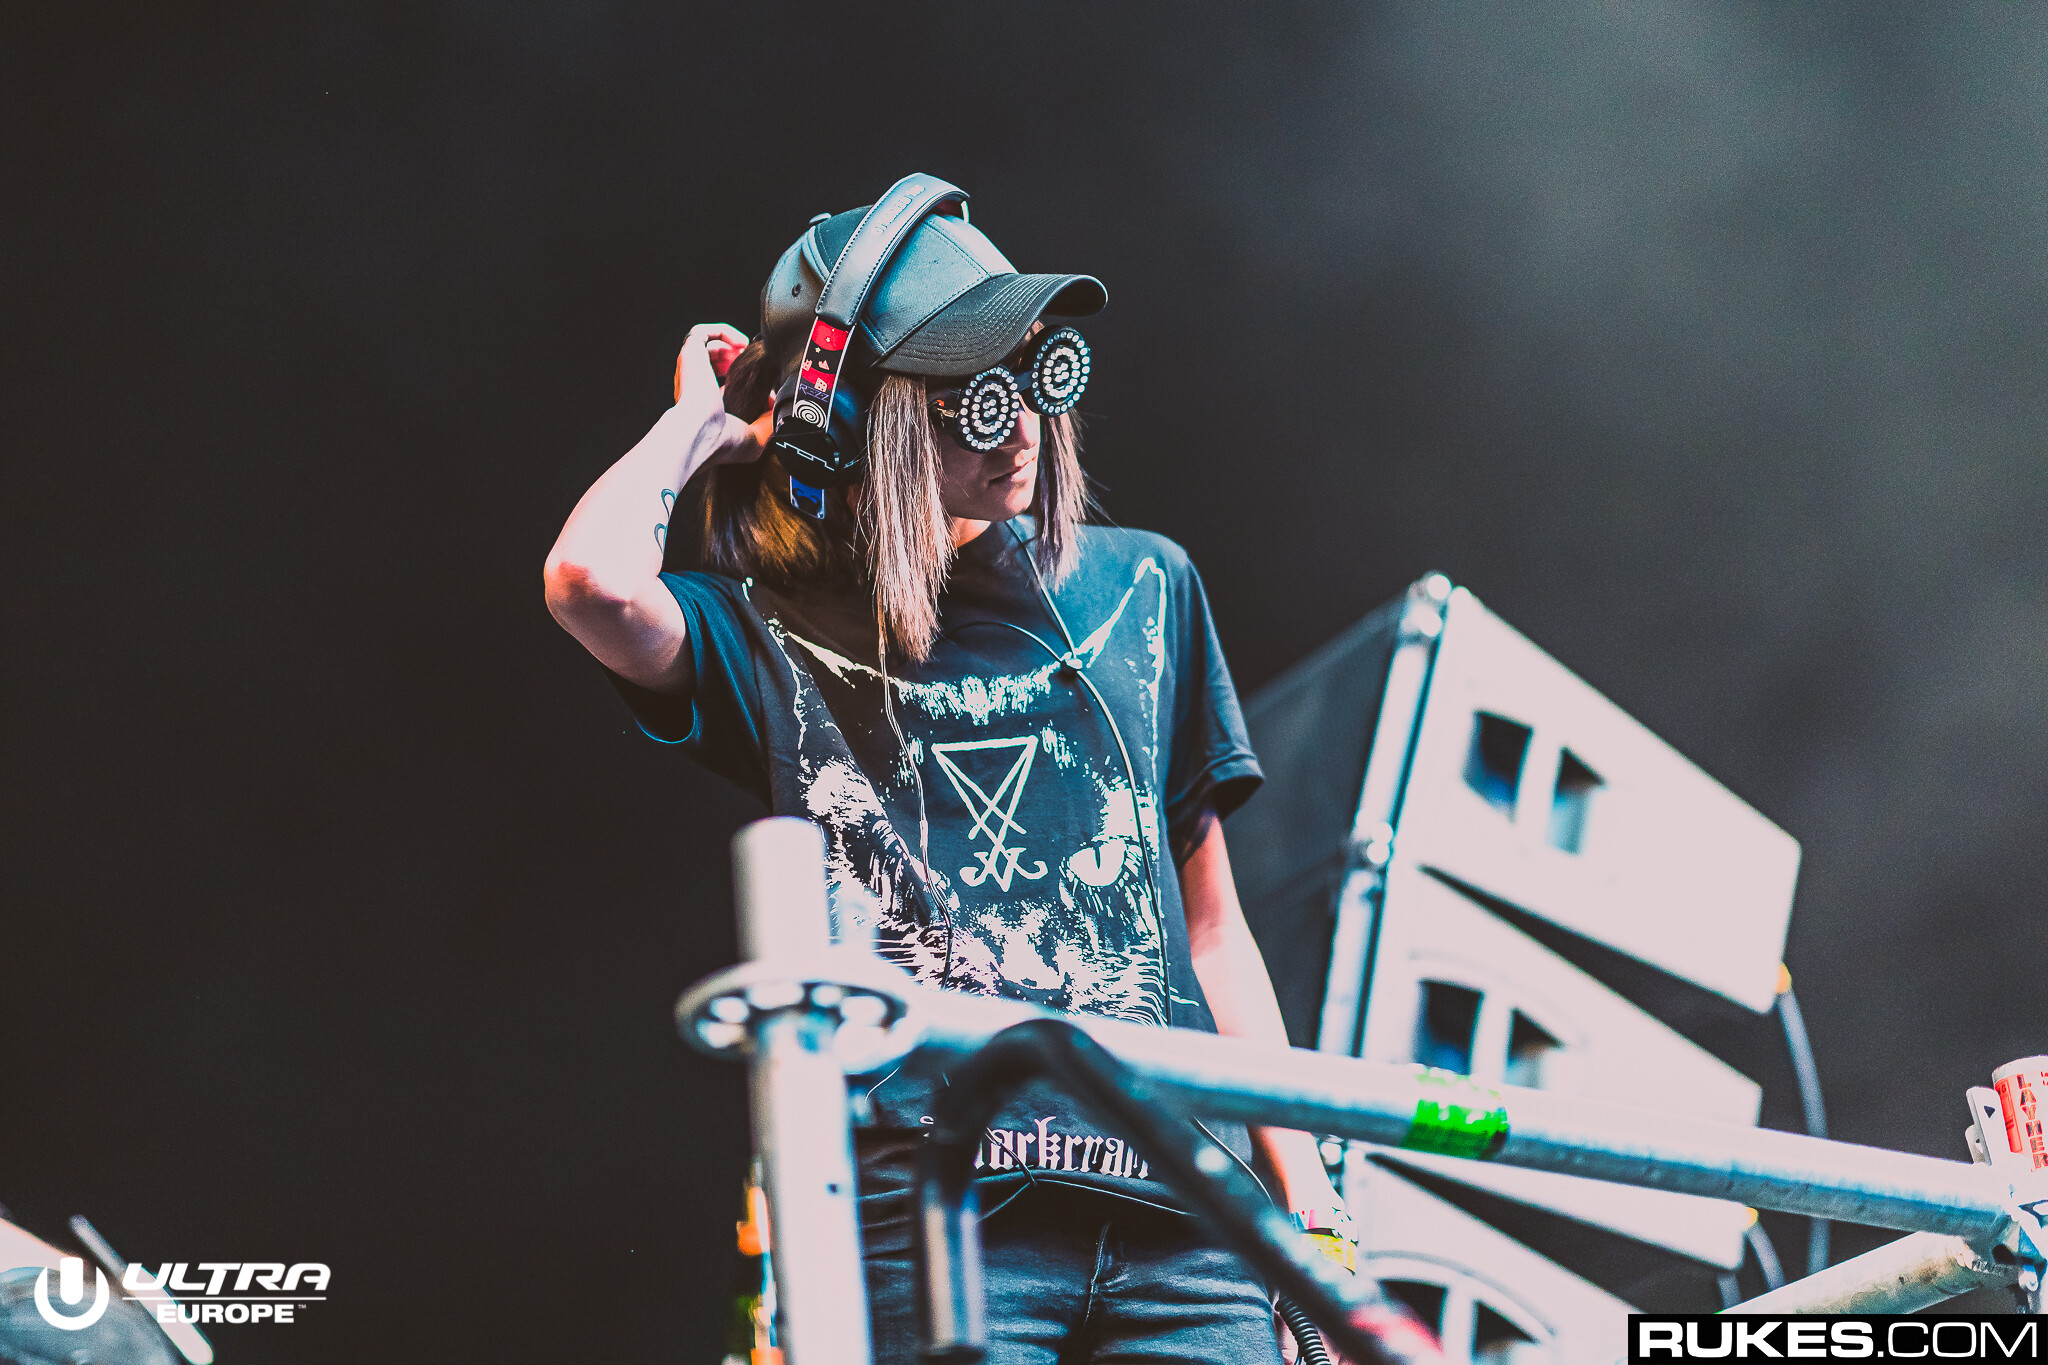 Rezz enlists Shadient & fknsyd for ‘Blue In The Face’ off upcoming ‘IT’S NOT A PHASE’ EP